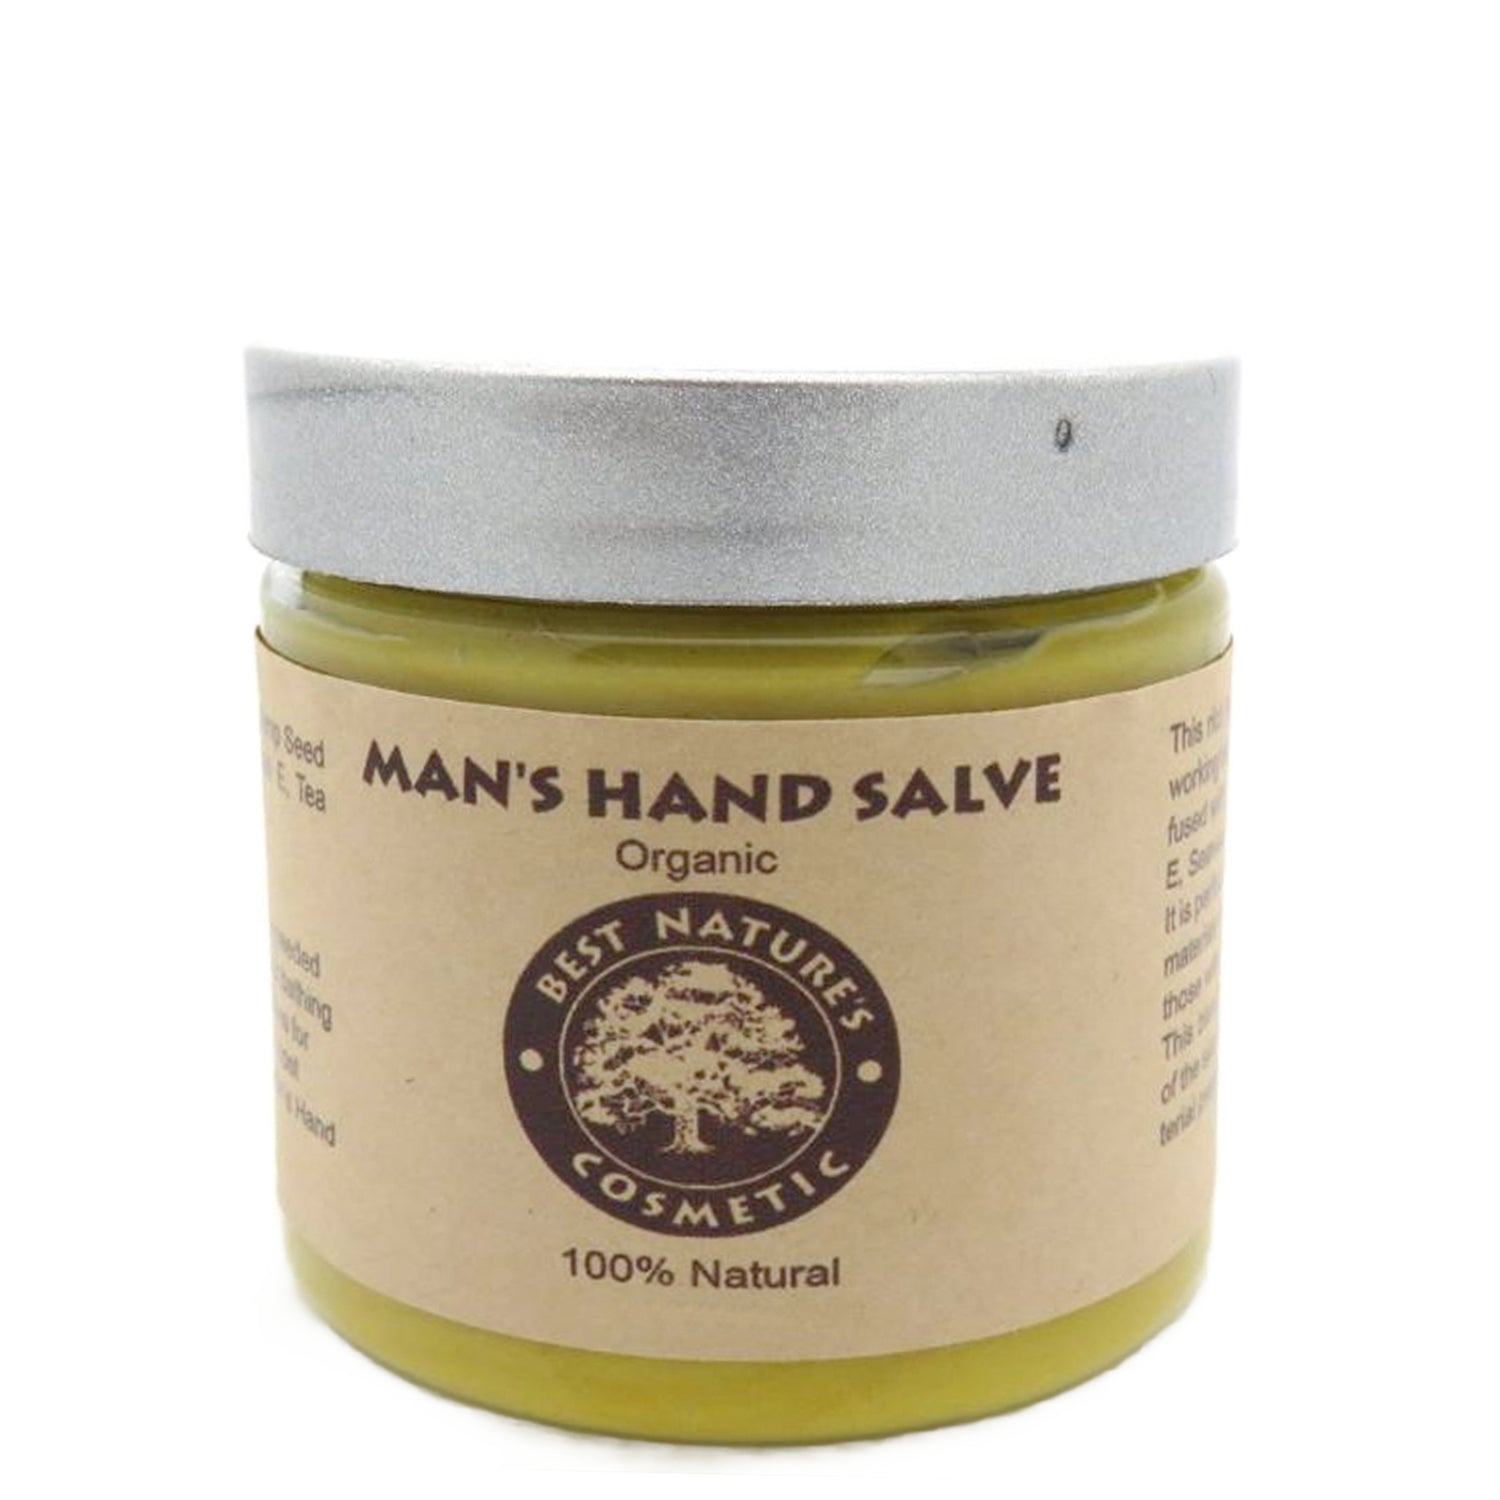 Organic Man's Hands Salve for hard working man hands, extremely dry skin, sooth dry, chapped, calloused working hands... 5oz / 150ml